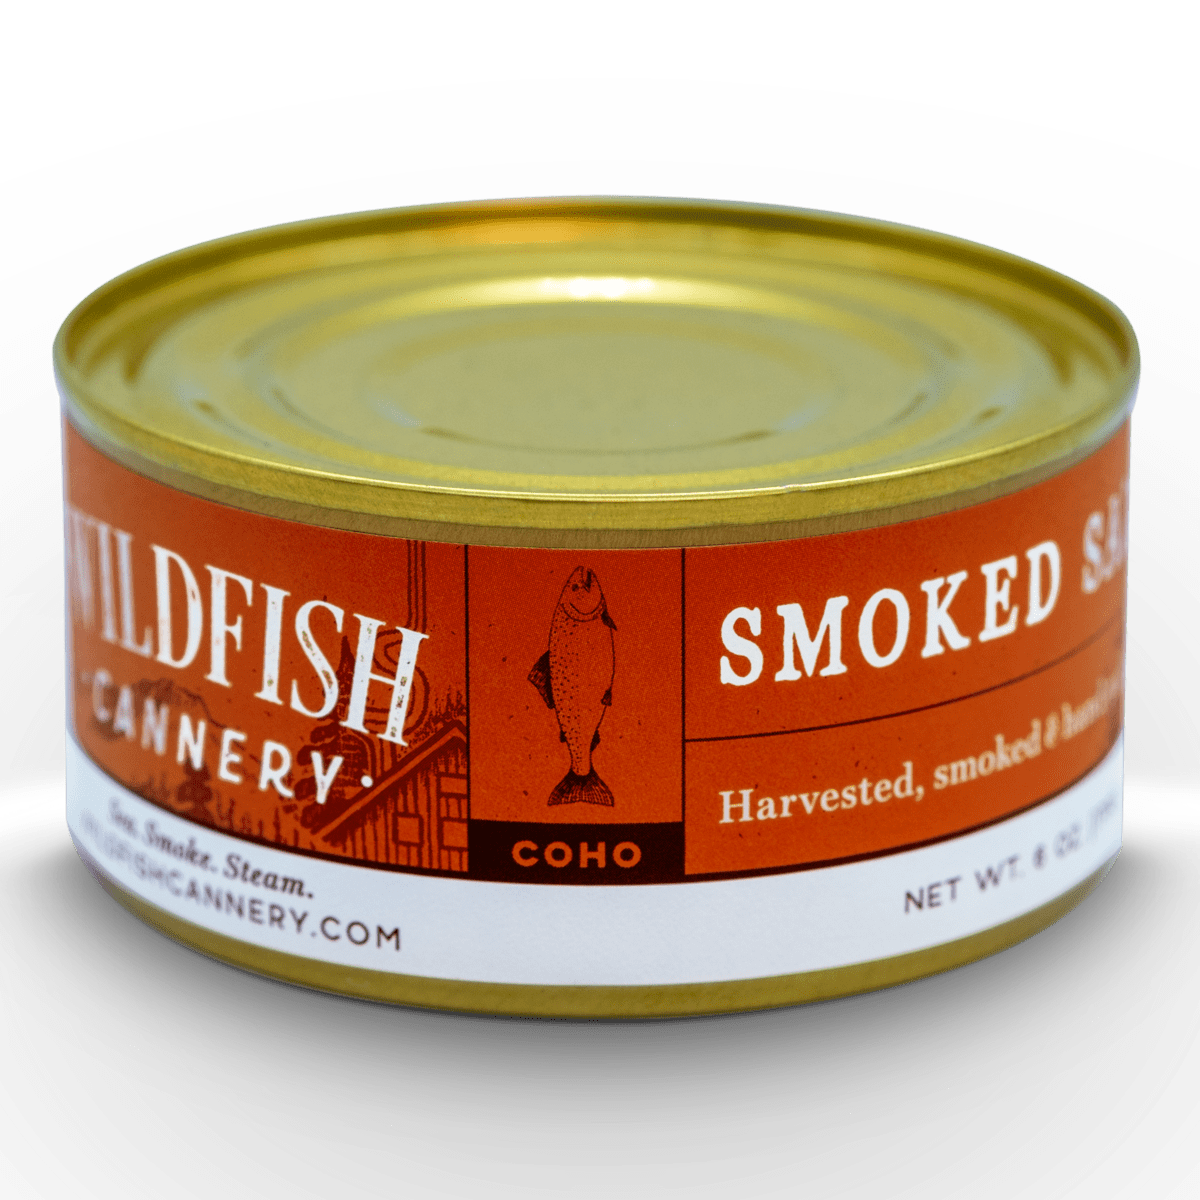 Image of the front of a tin of Wildfish Cannery Smoked Coho Salmon